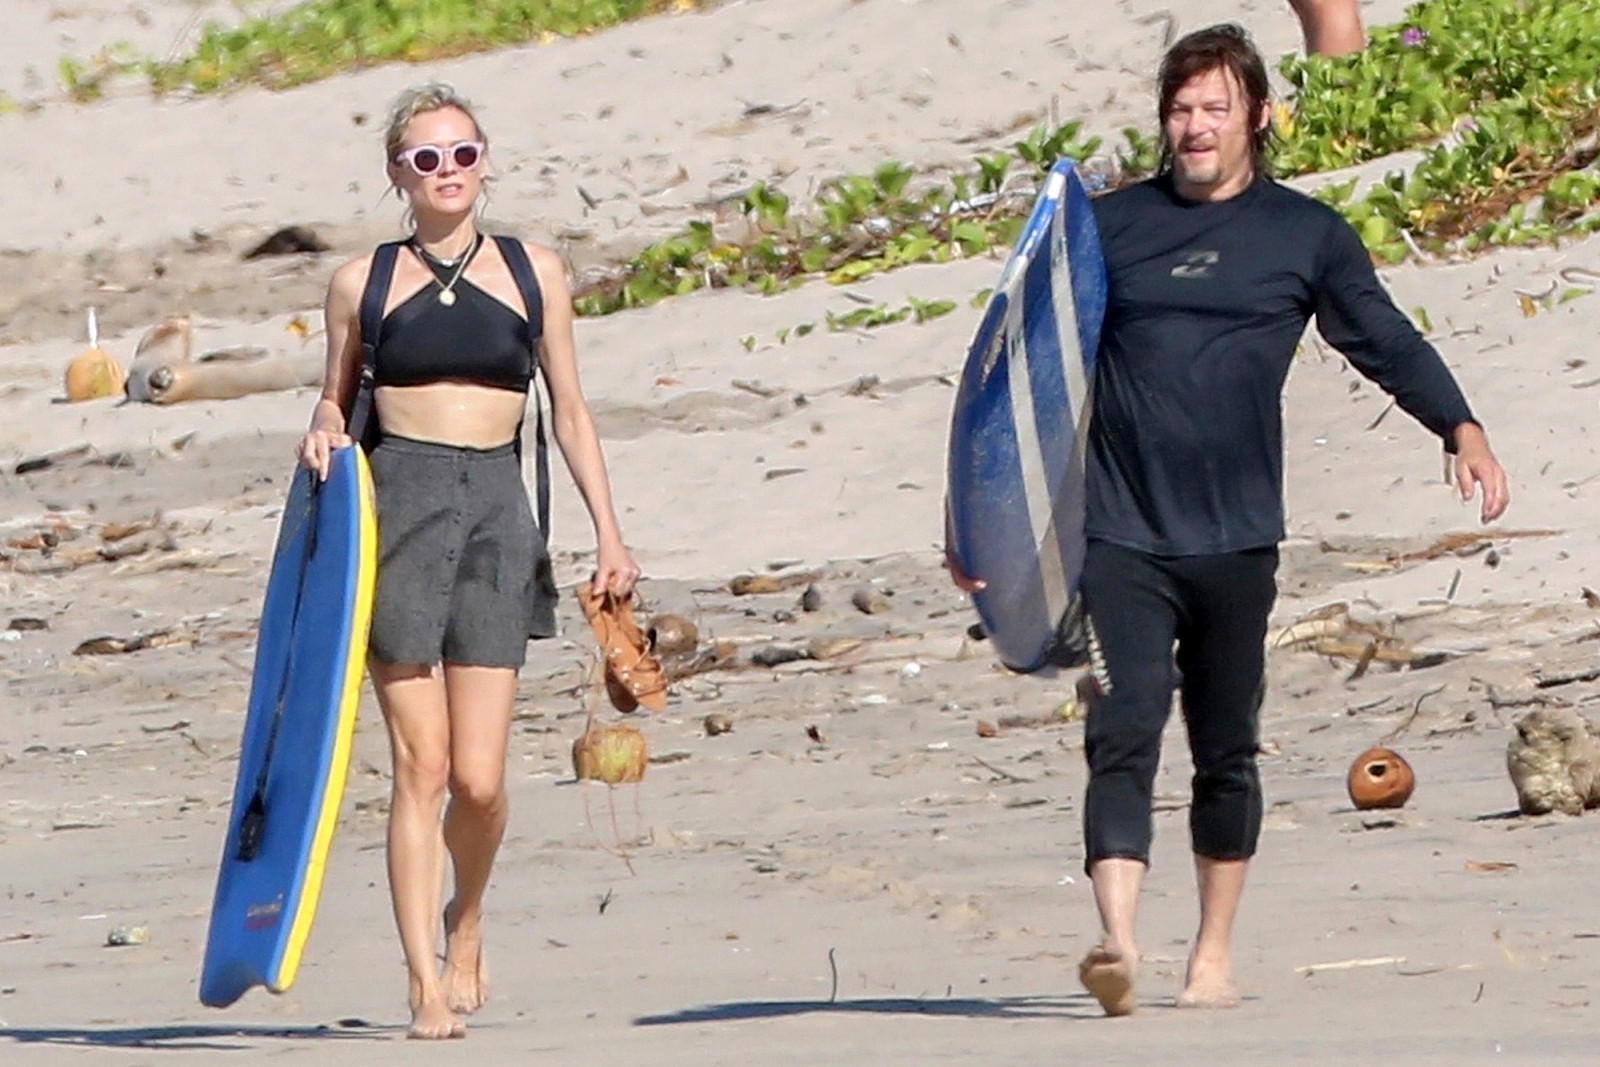 Diane Kruger and Norman Reedus Hang Out in Costa Rica | Q COSTA RICA